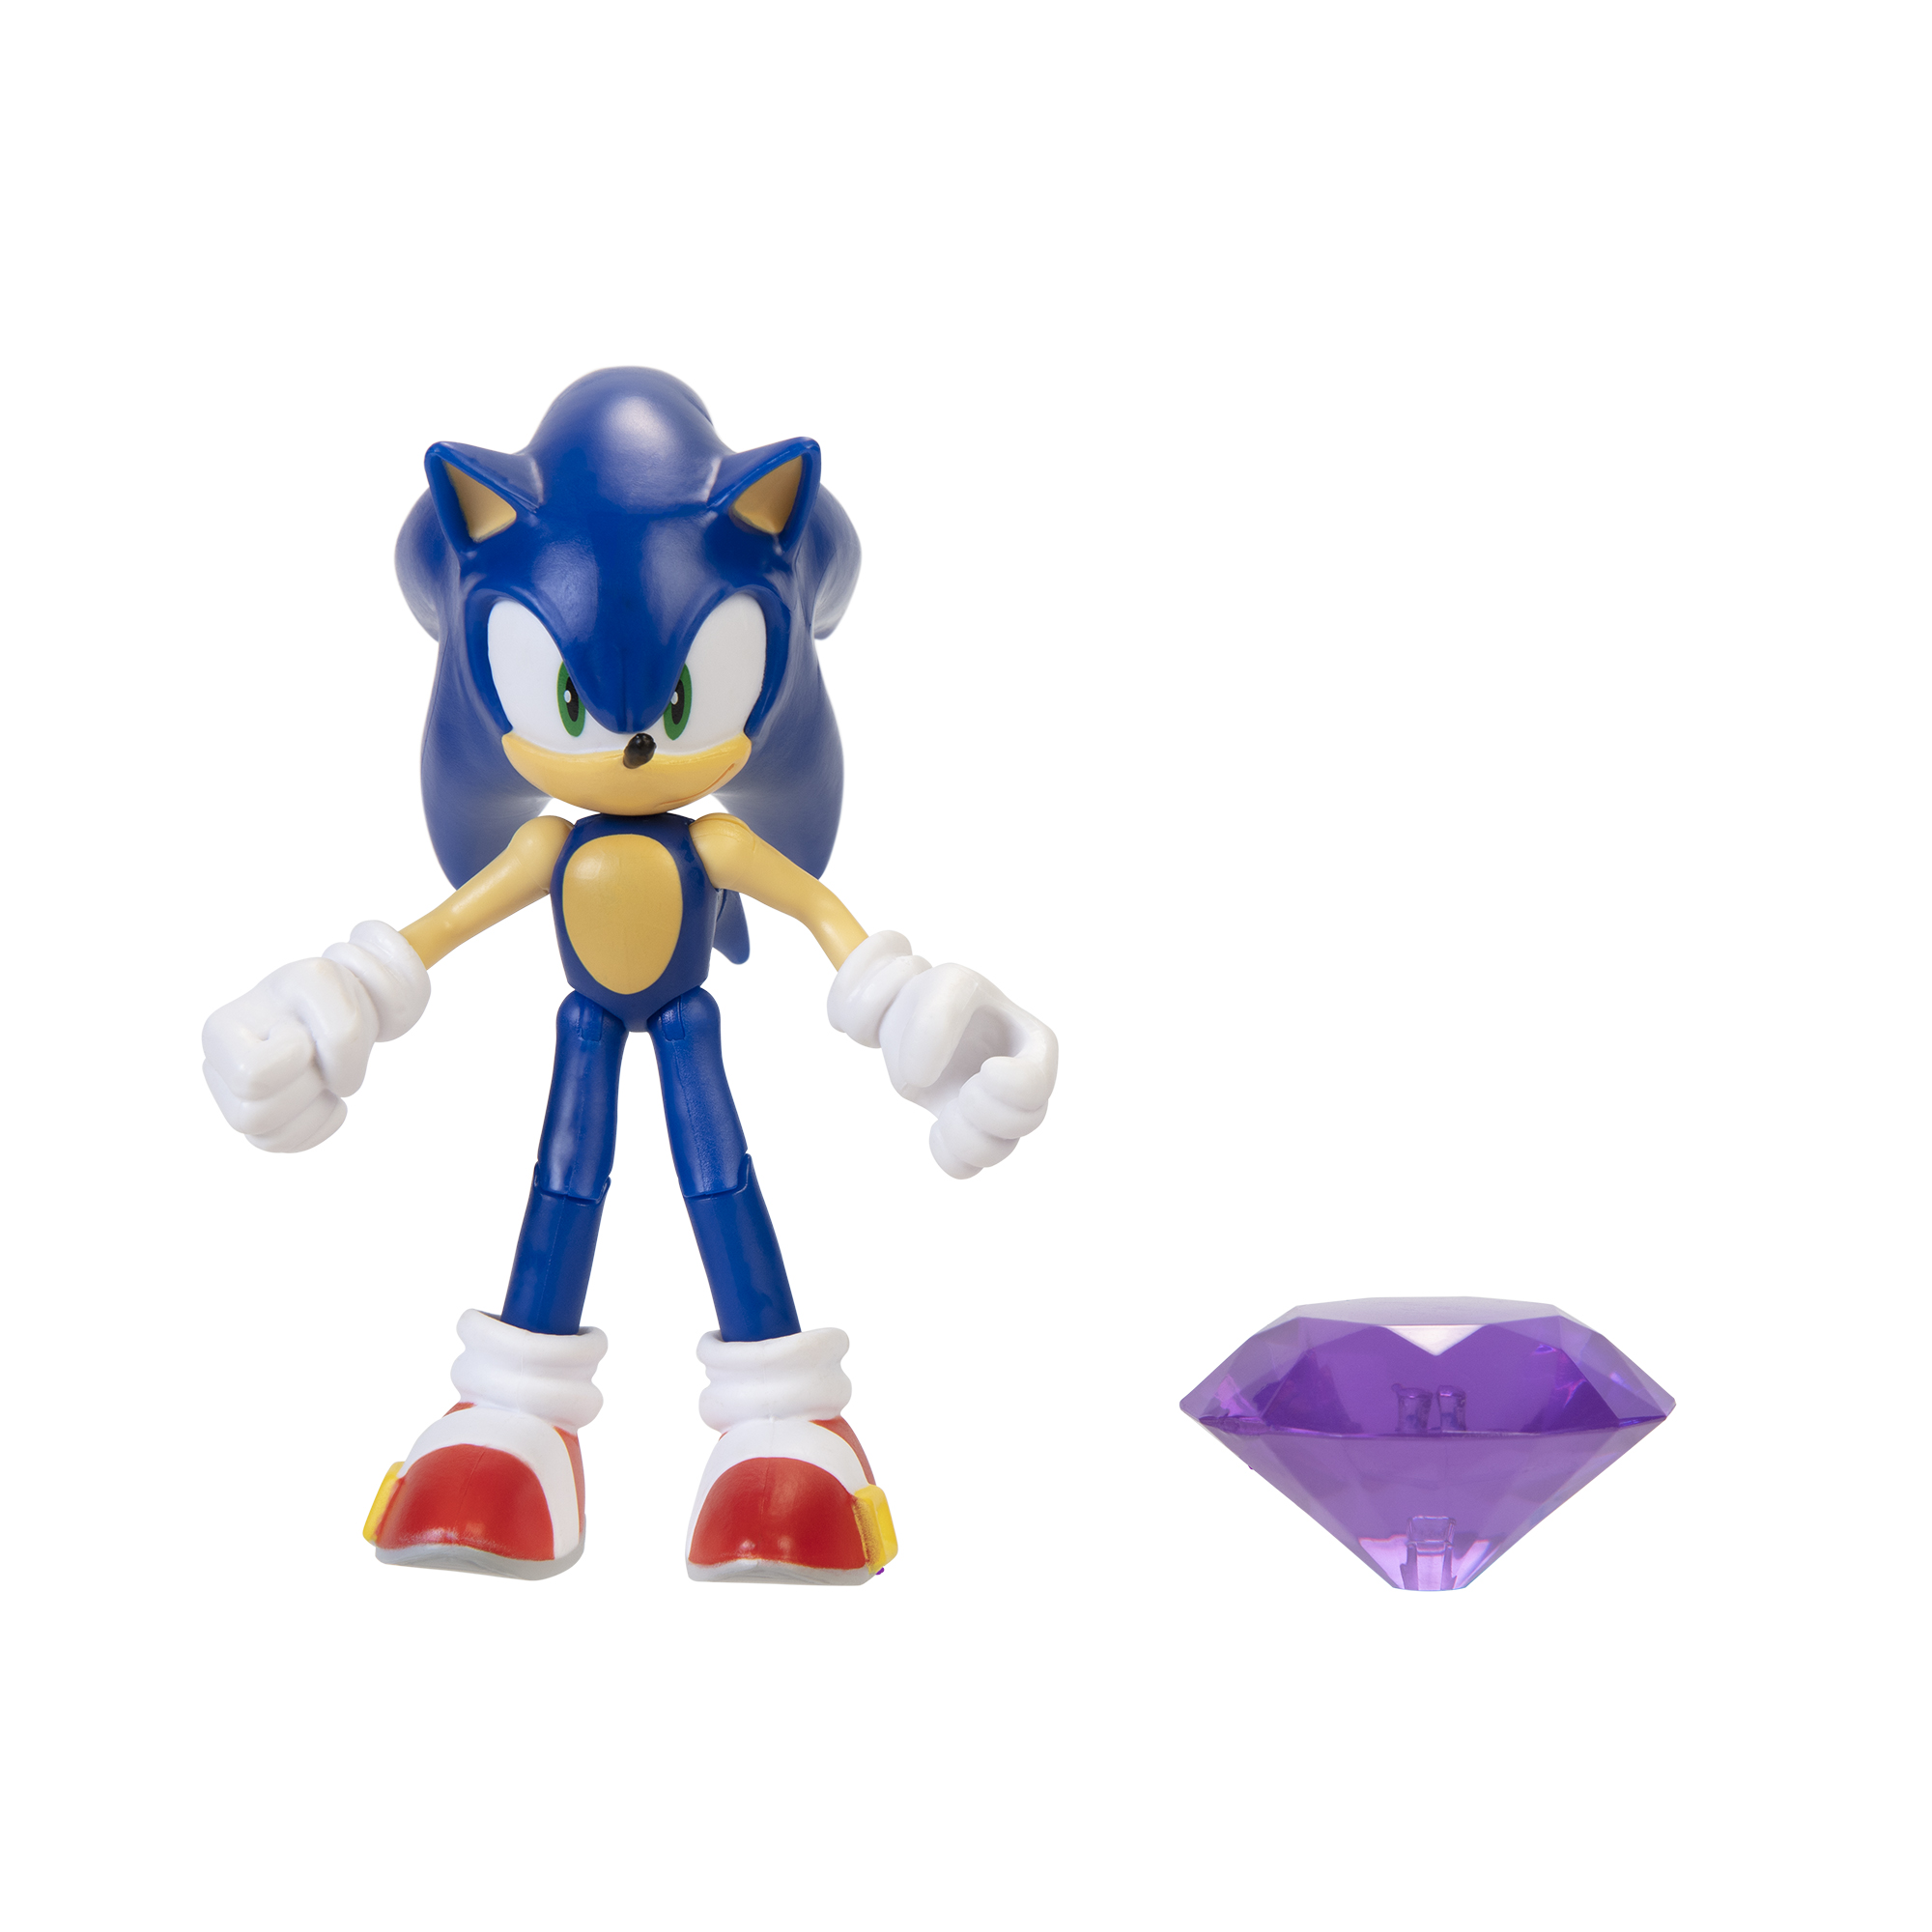 Sonic The Hedgehog Team Sonic Collection Super Sonic, Tails & Knuckles  Action Figure 3-Pack